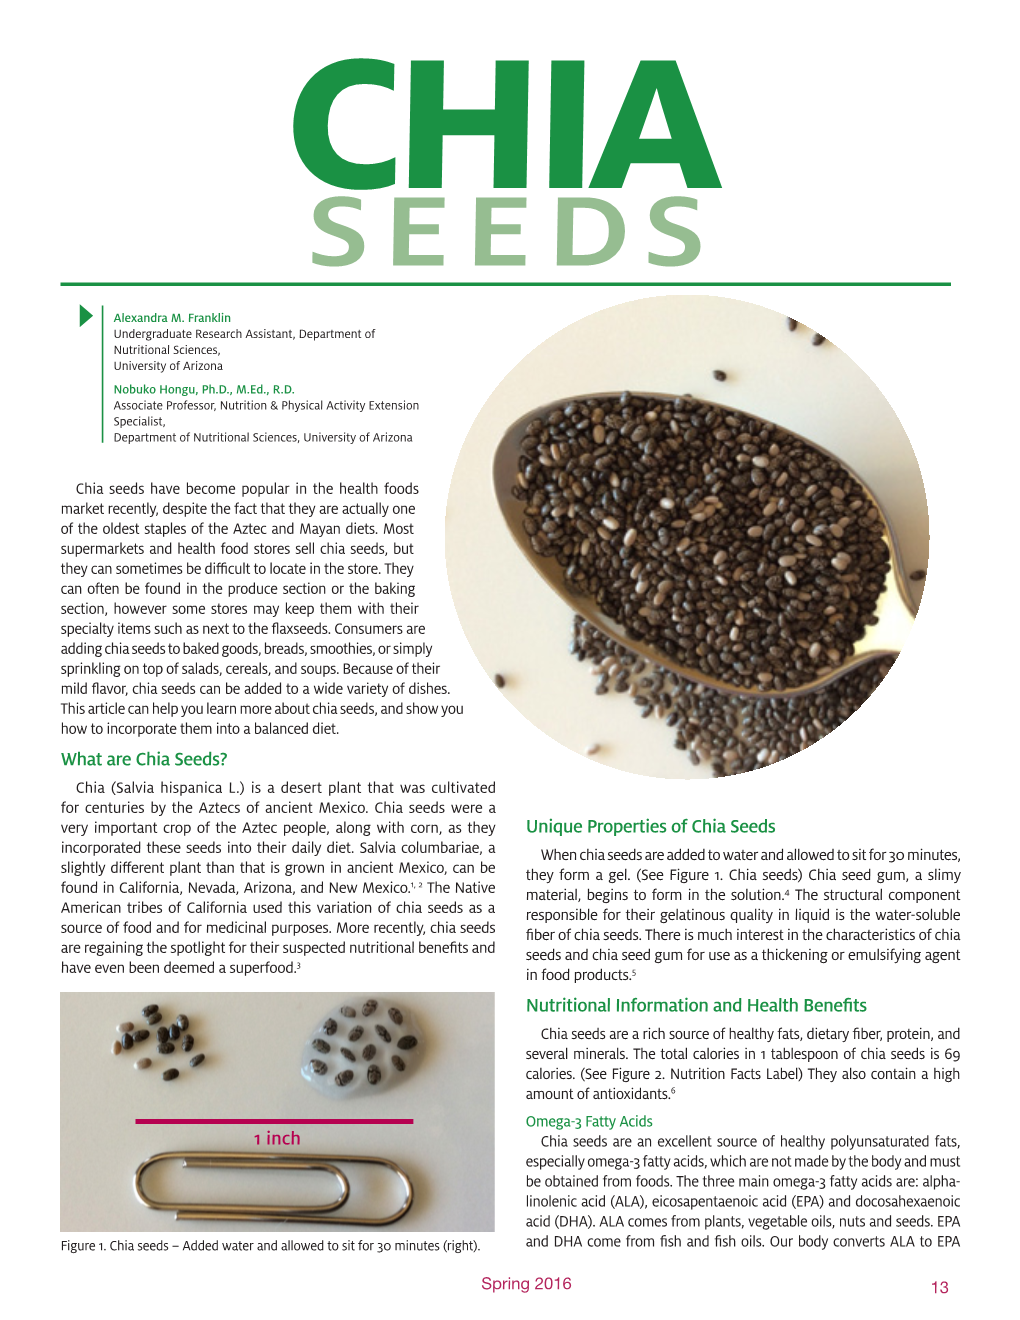 What Are Chia Seeds? Chia (Salvia Hispanica L.) Is a Desert Plant That Was Cultivated for Centuries by the Aztecs of Ancient Mexico